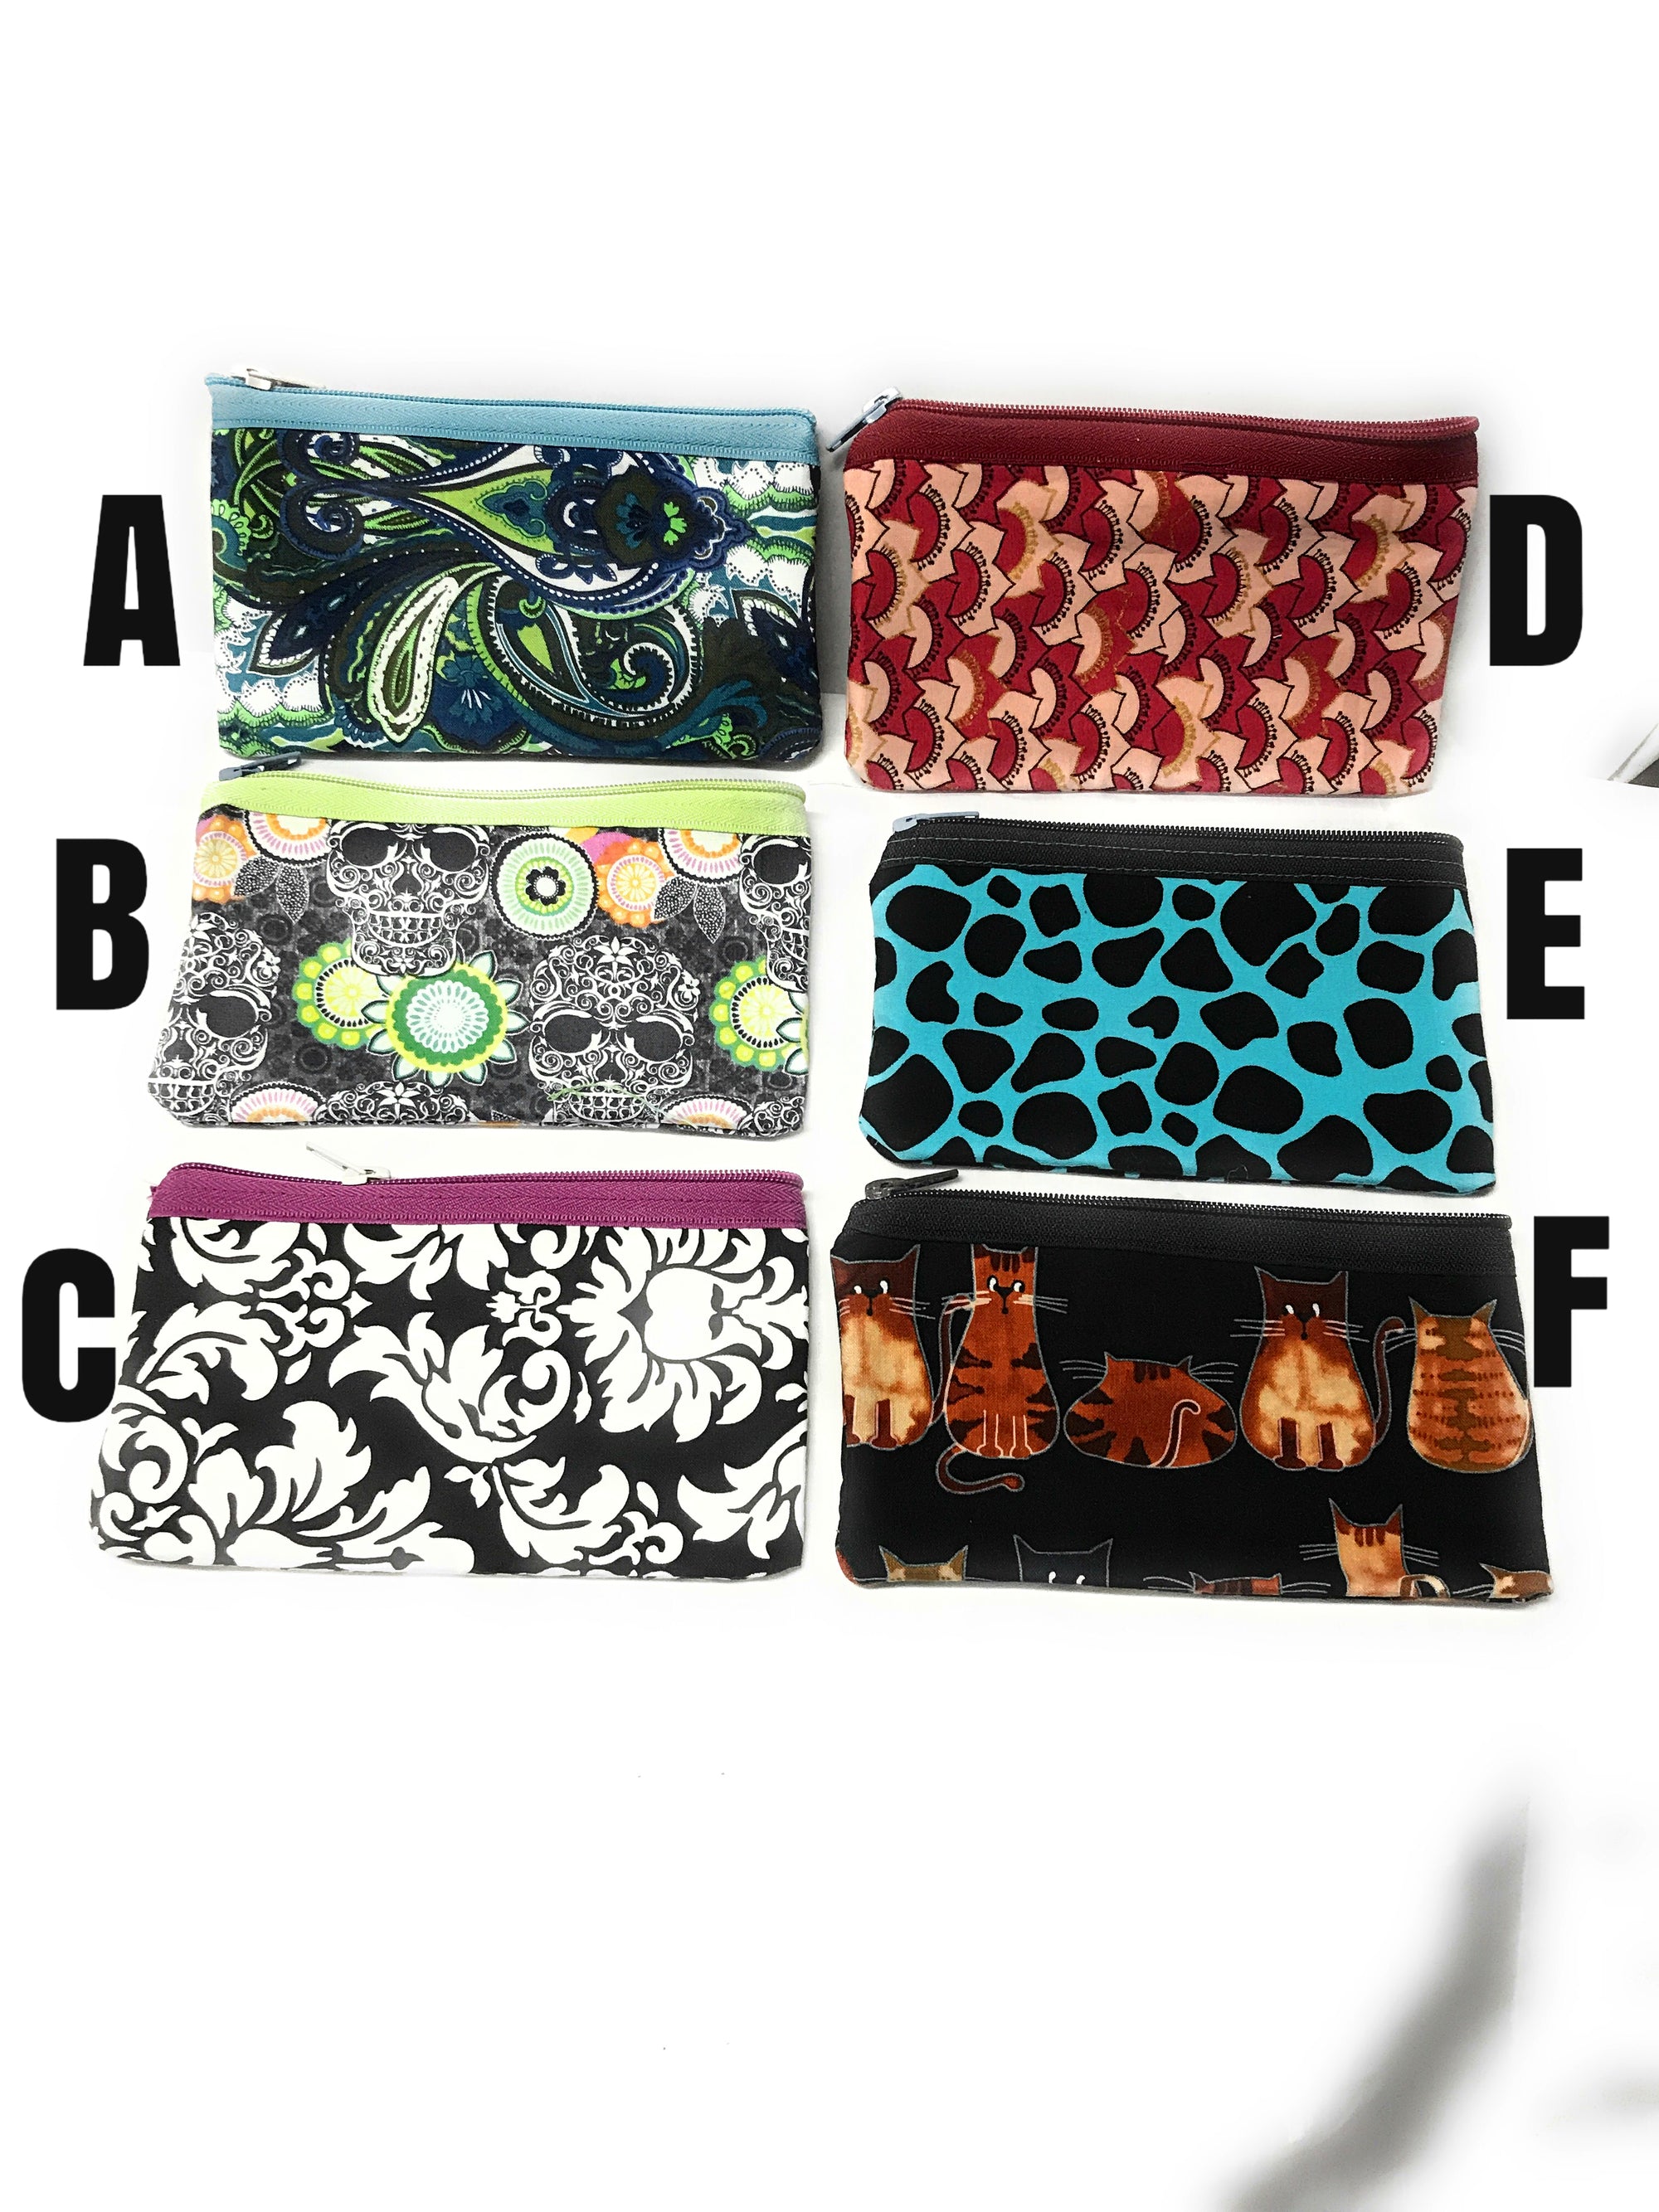 Zippered Change Purse fits in all coupon organizers